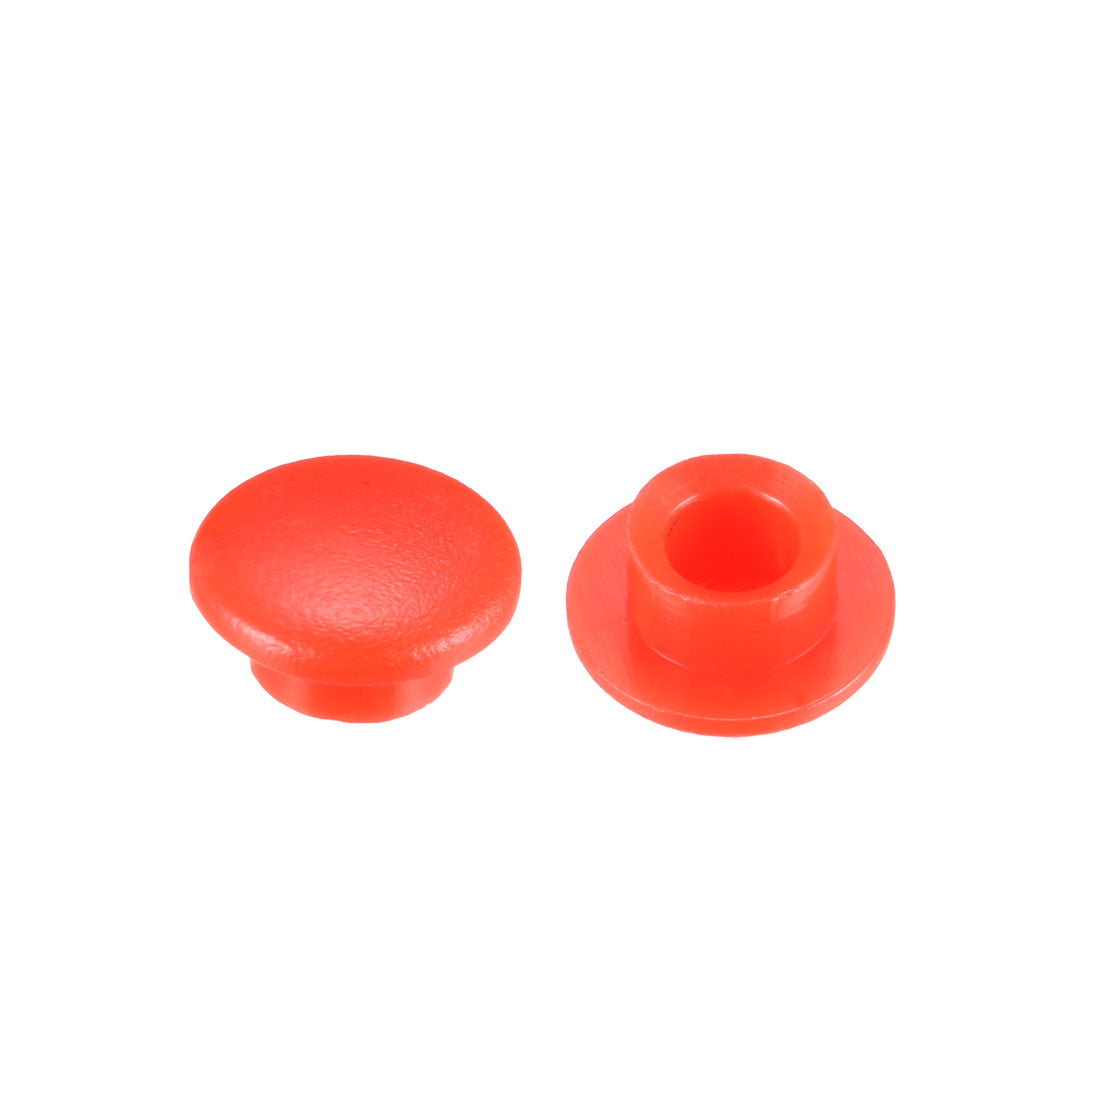 uxcell Uxcell 30Pcs 3.2mm Hole Dia Plastic Push Button Tactile Switch Caps Cover Keycaps Protector Red for 6x6 Micro Switch